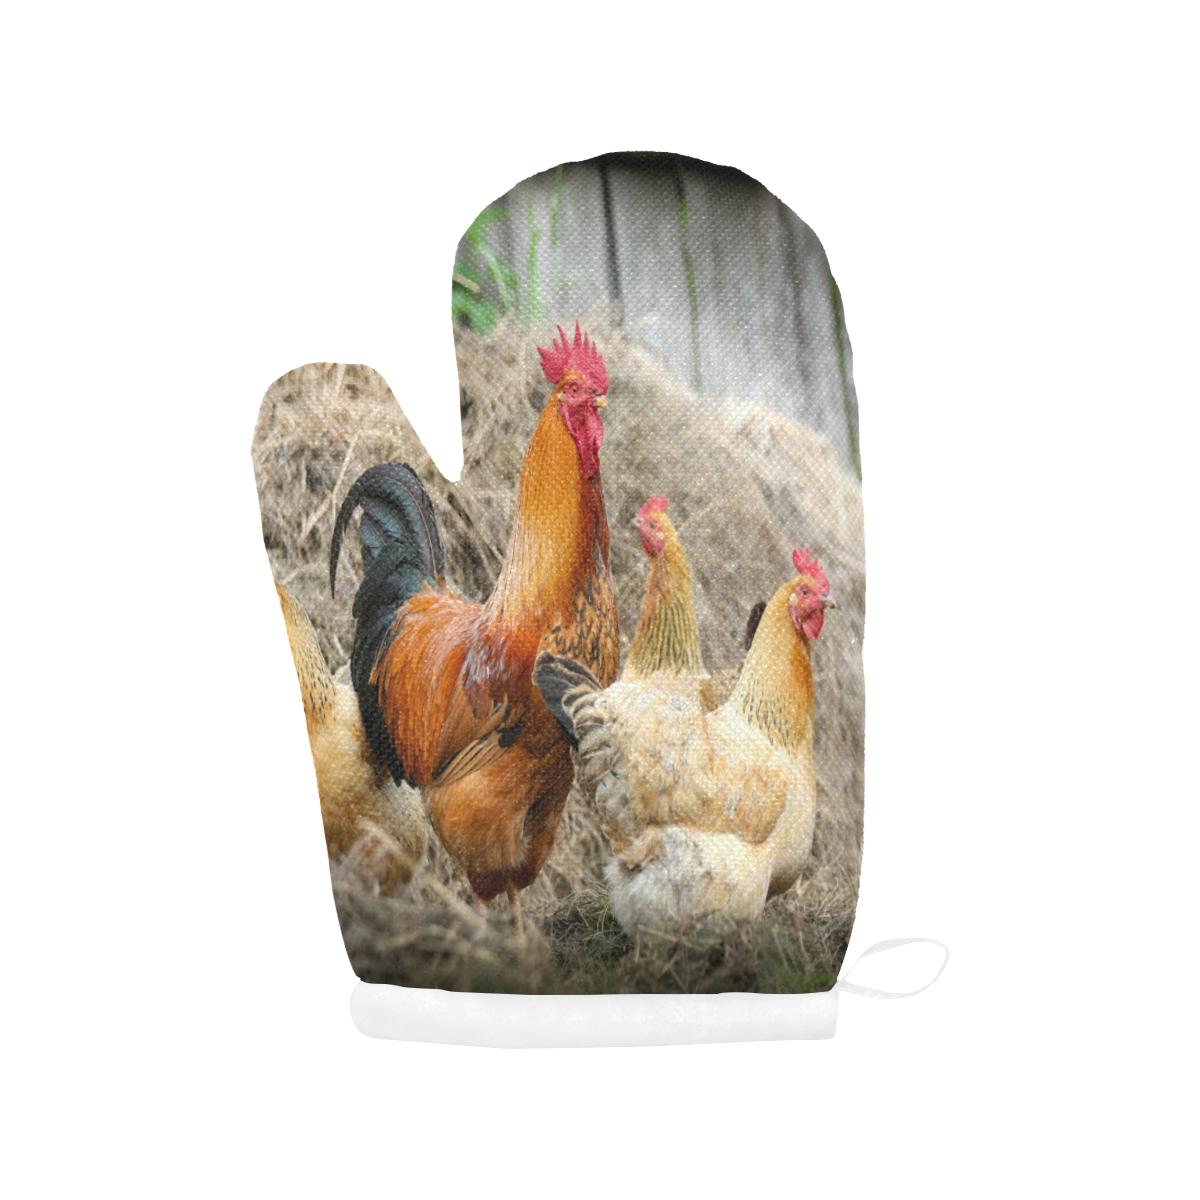 Farmside Roosters Oven Mitt (Two Pieces)